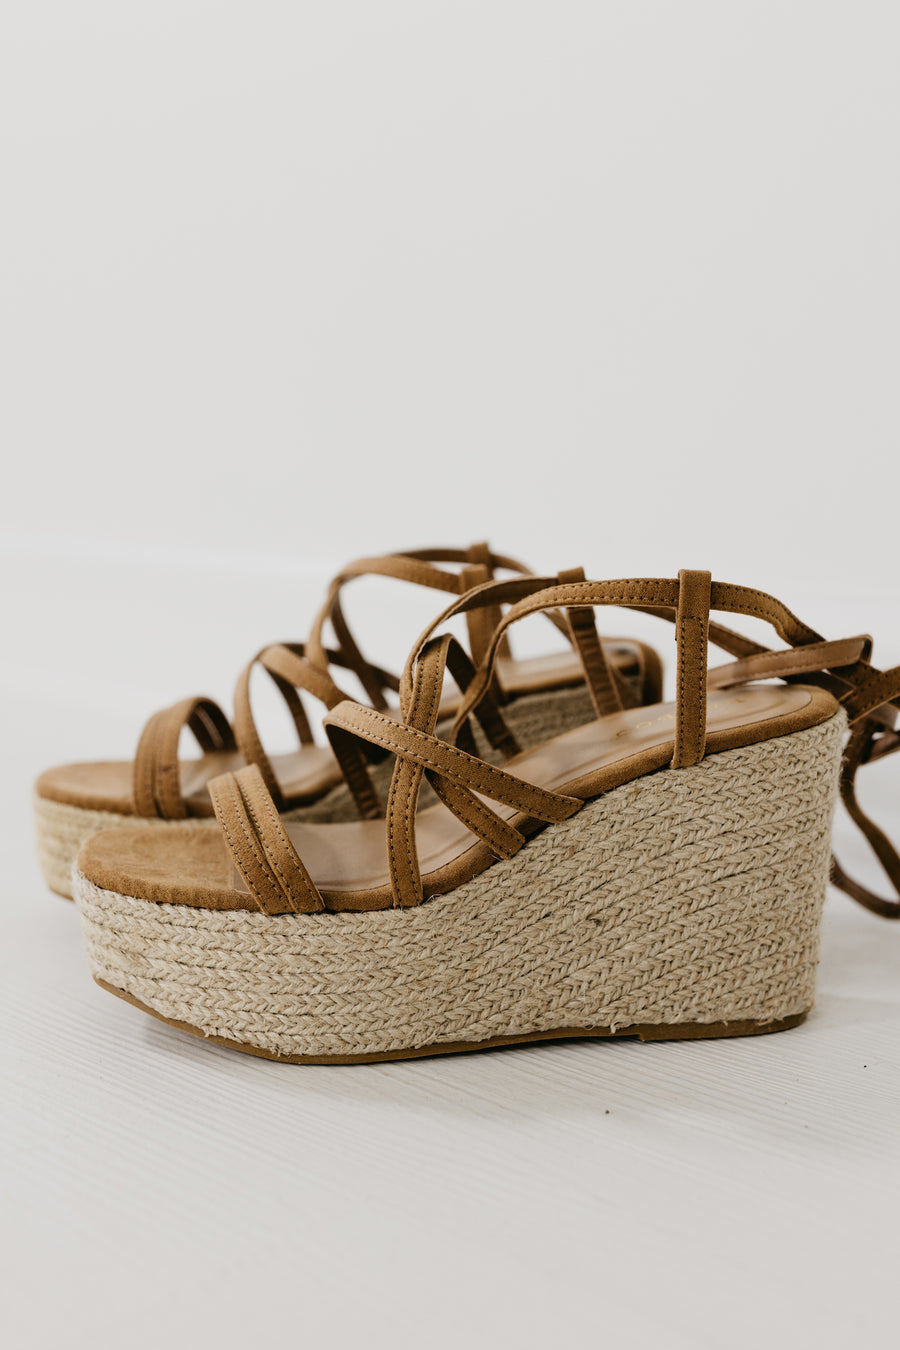 The Certify Strappy Ankle Espadrille